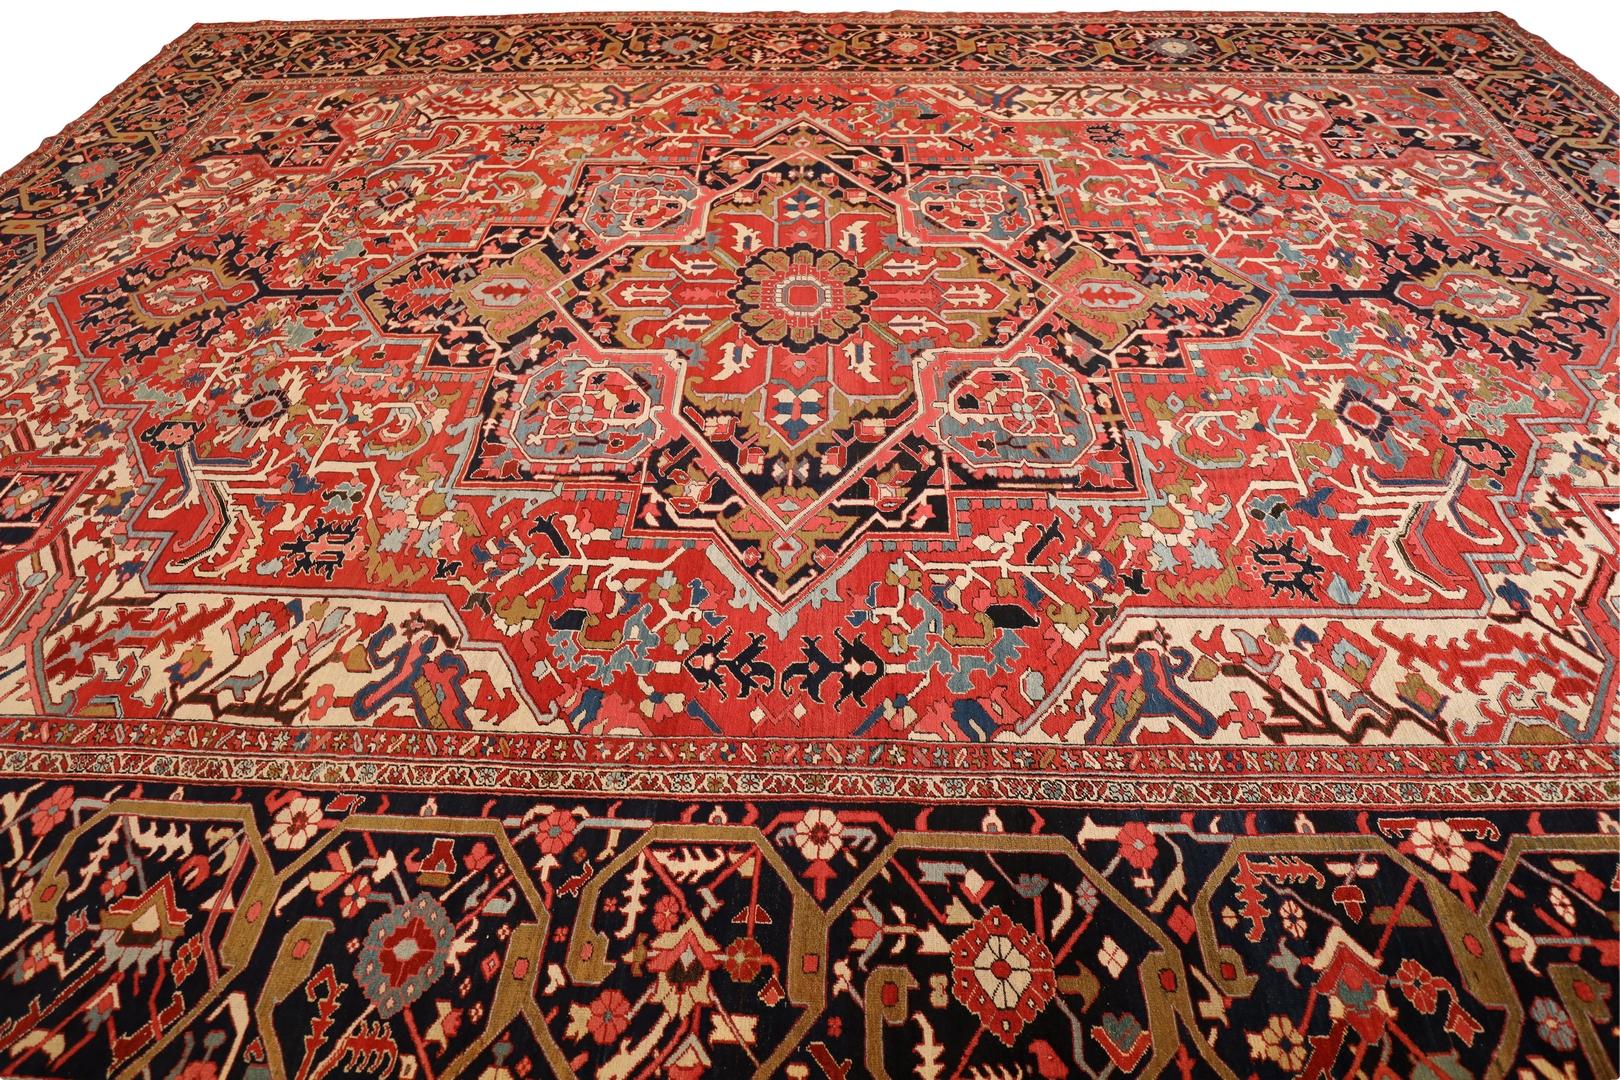 Hand-Knotted Heriz Antique Room Size, Red Ivory Green - 13'6